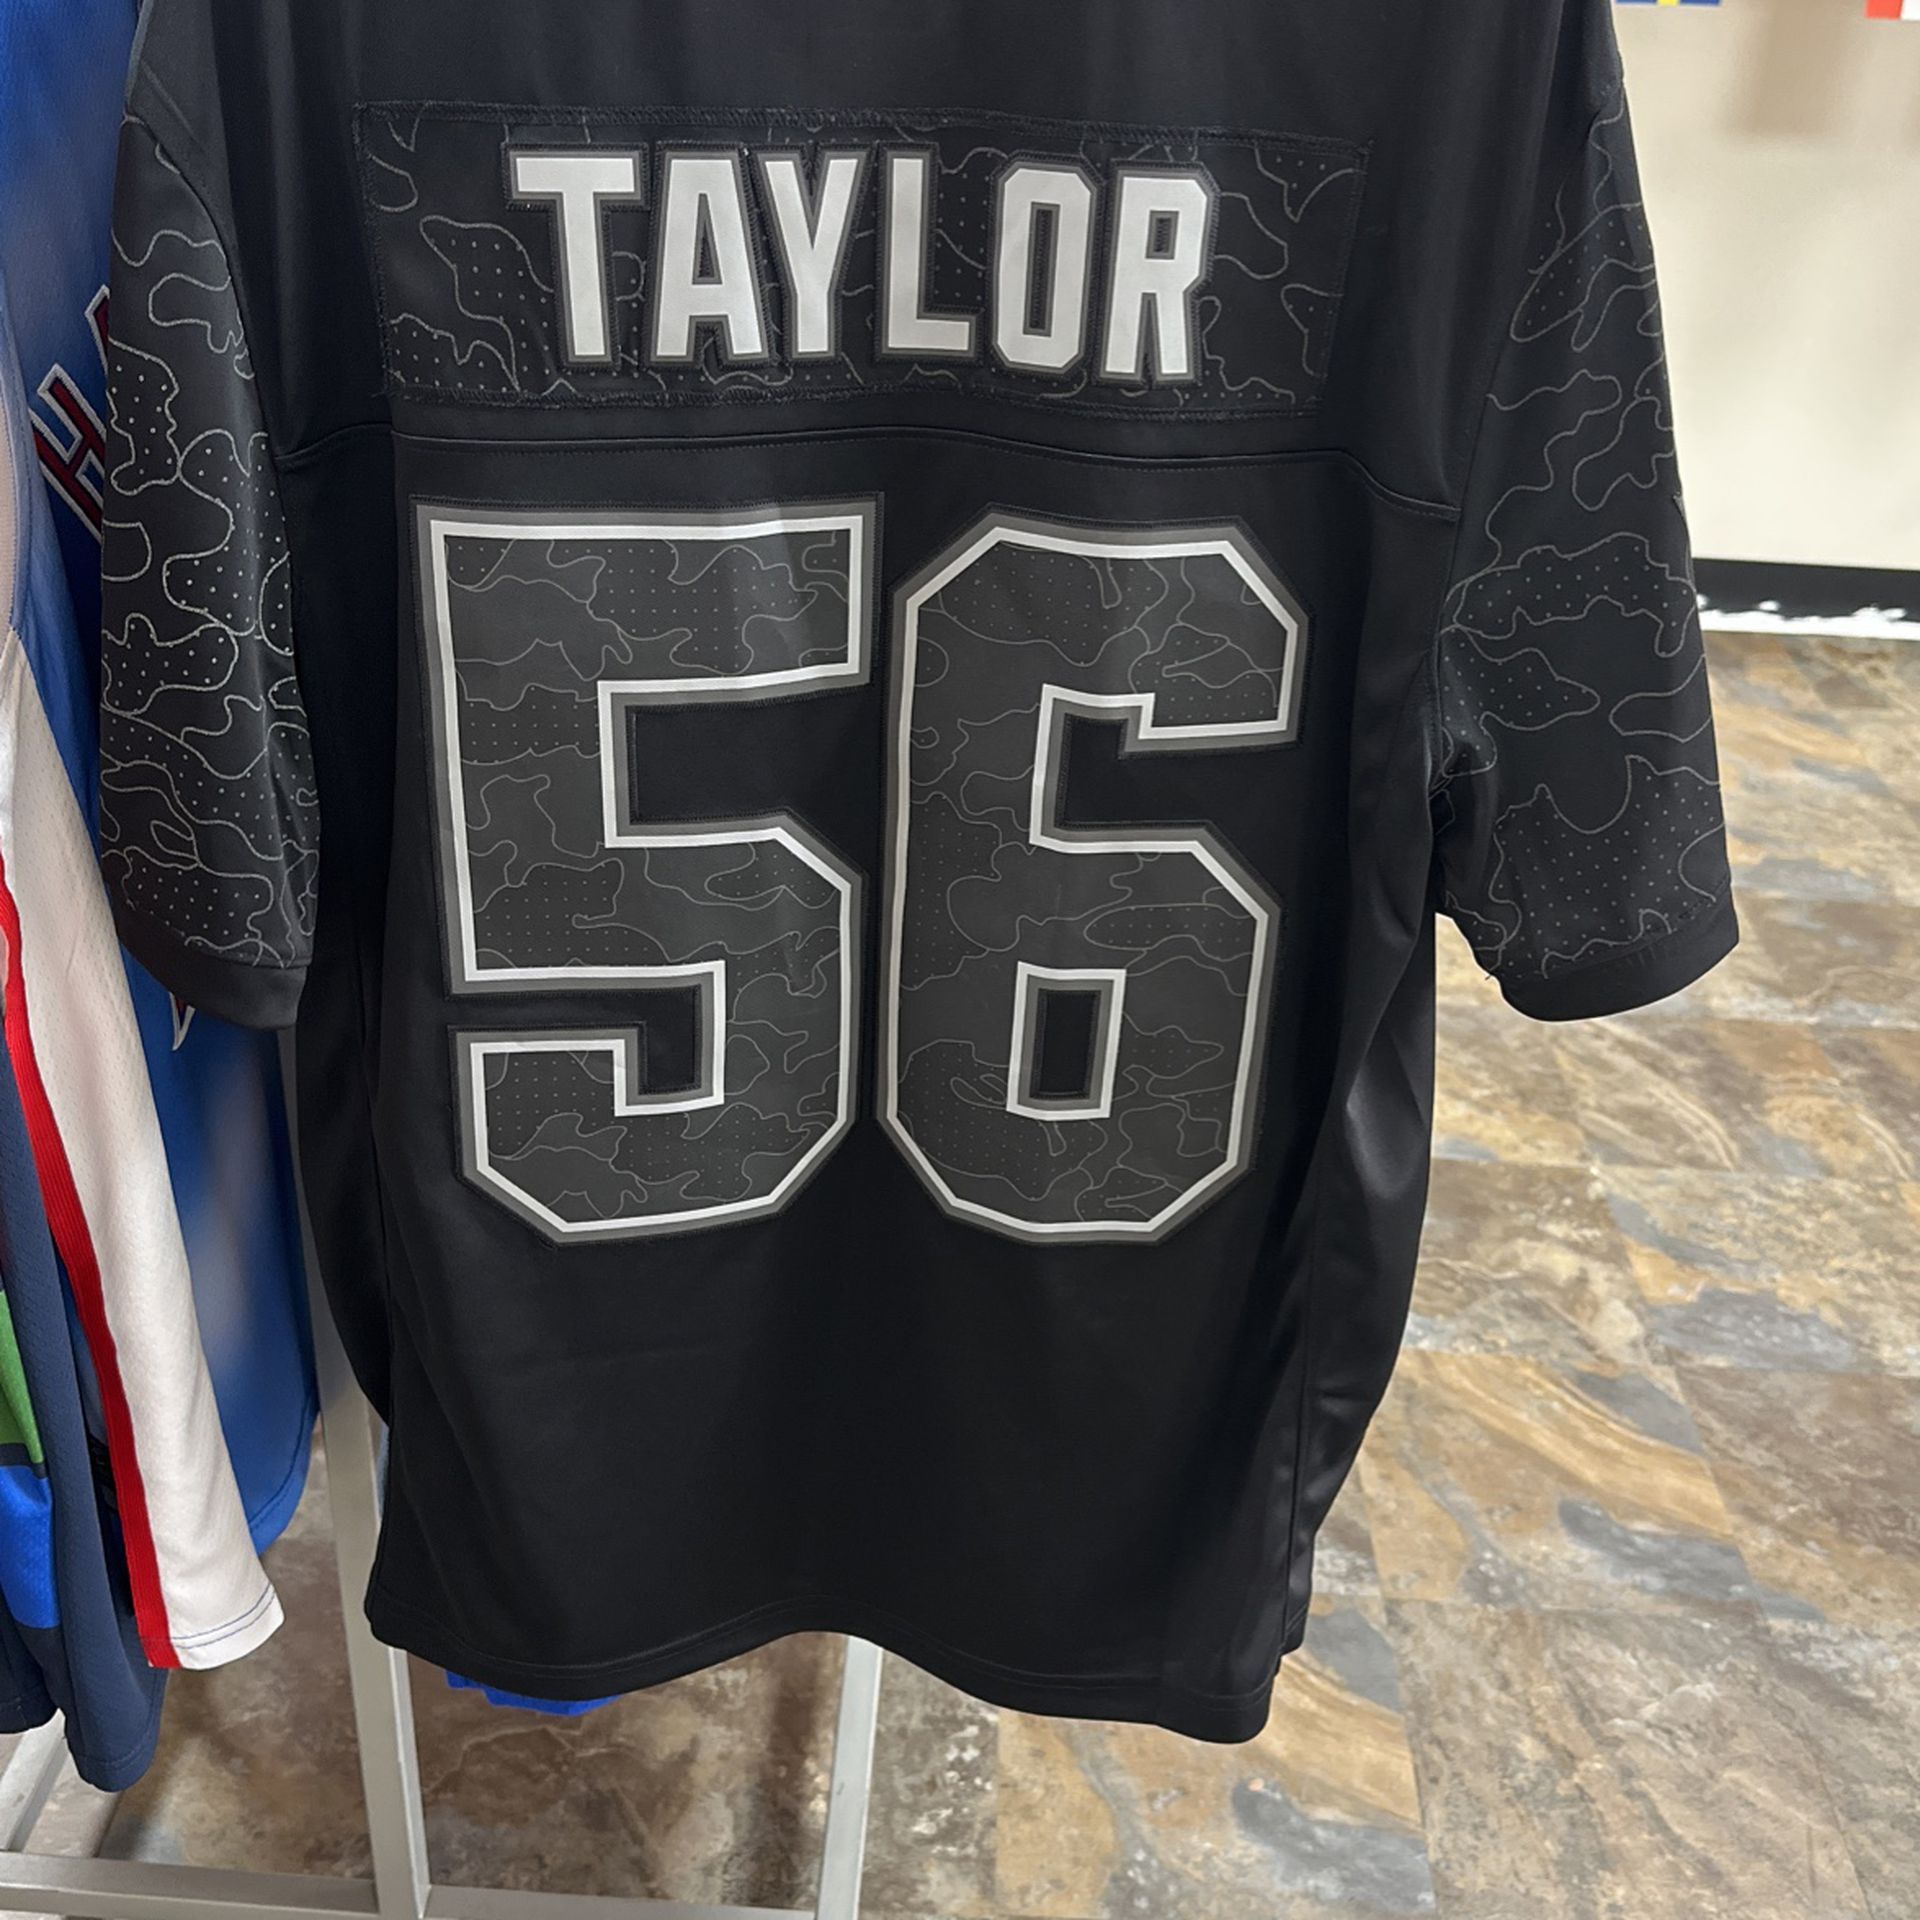 taylor 56 jersey